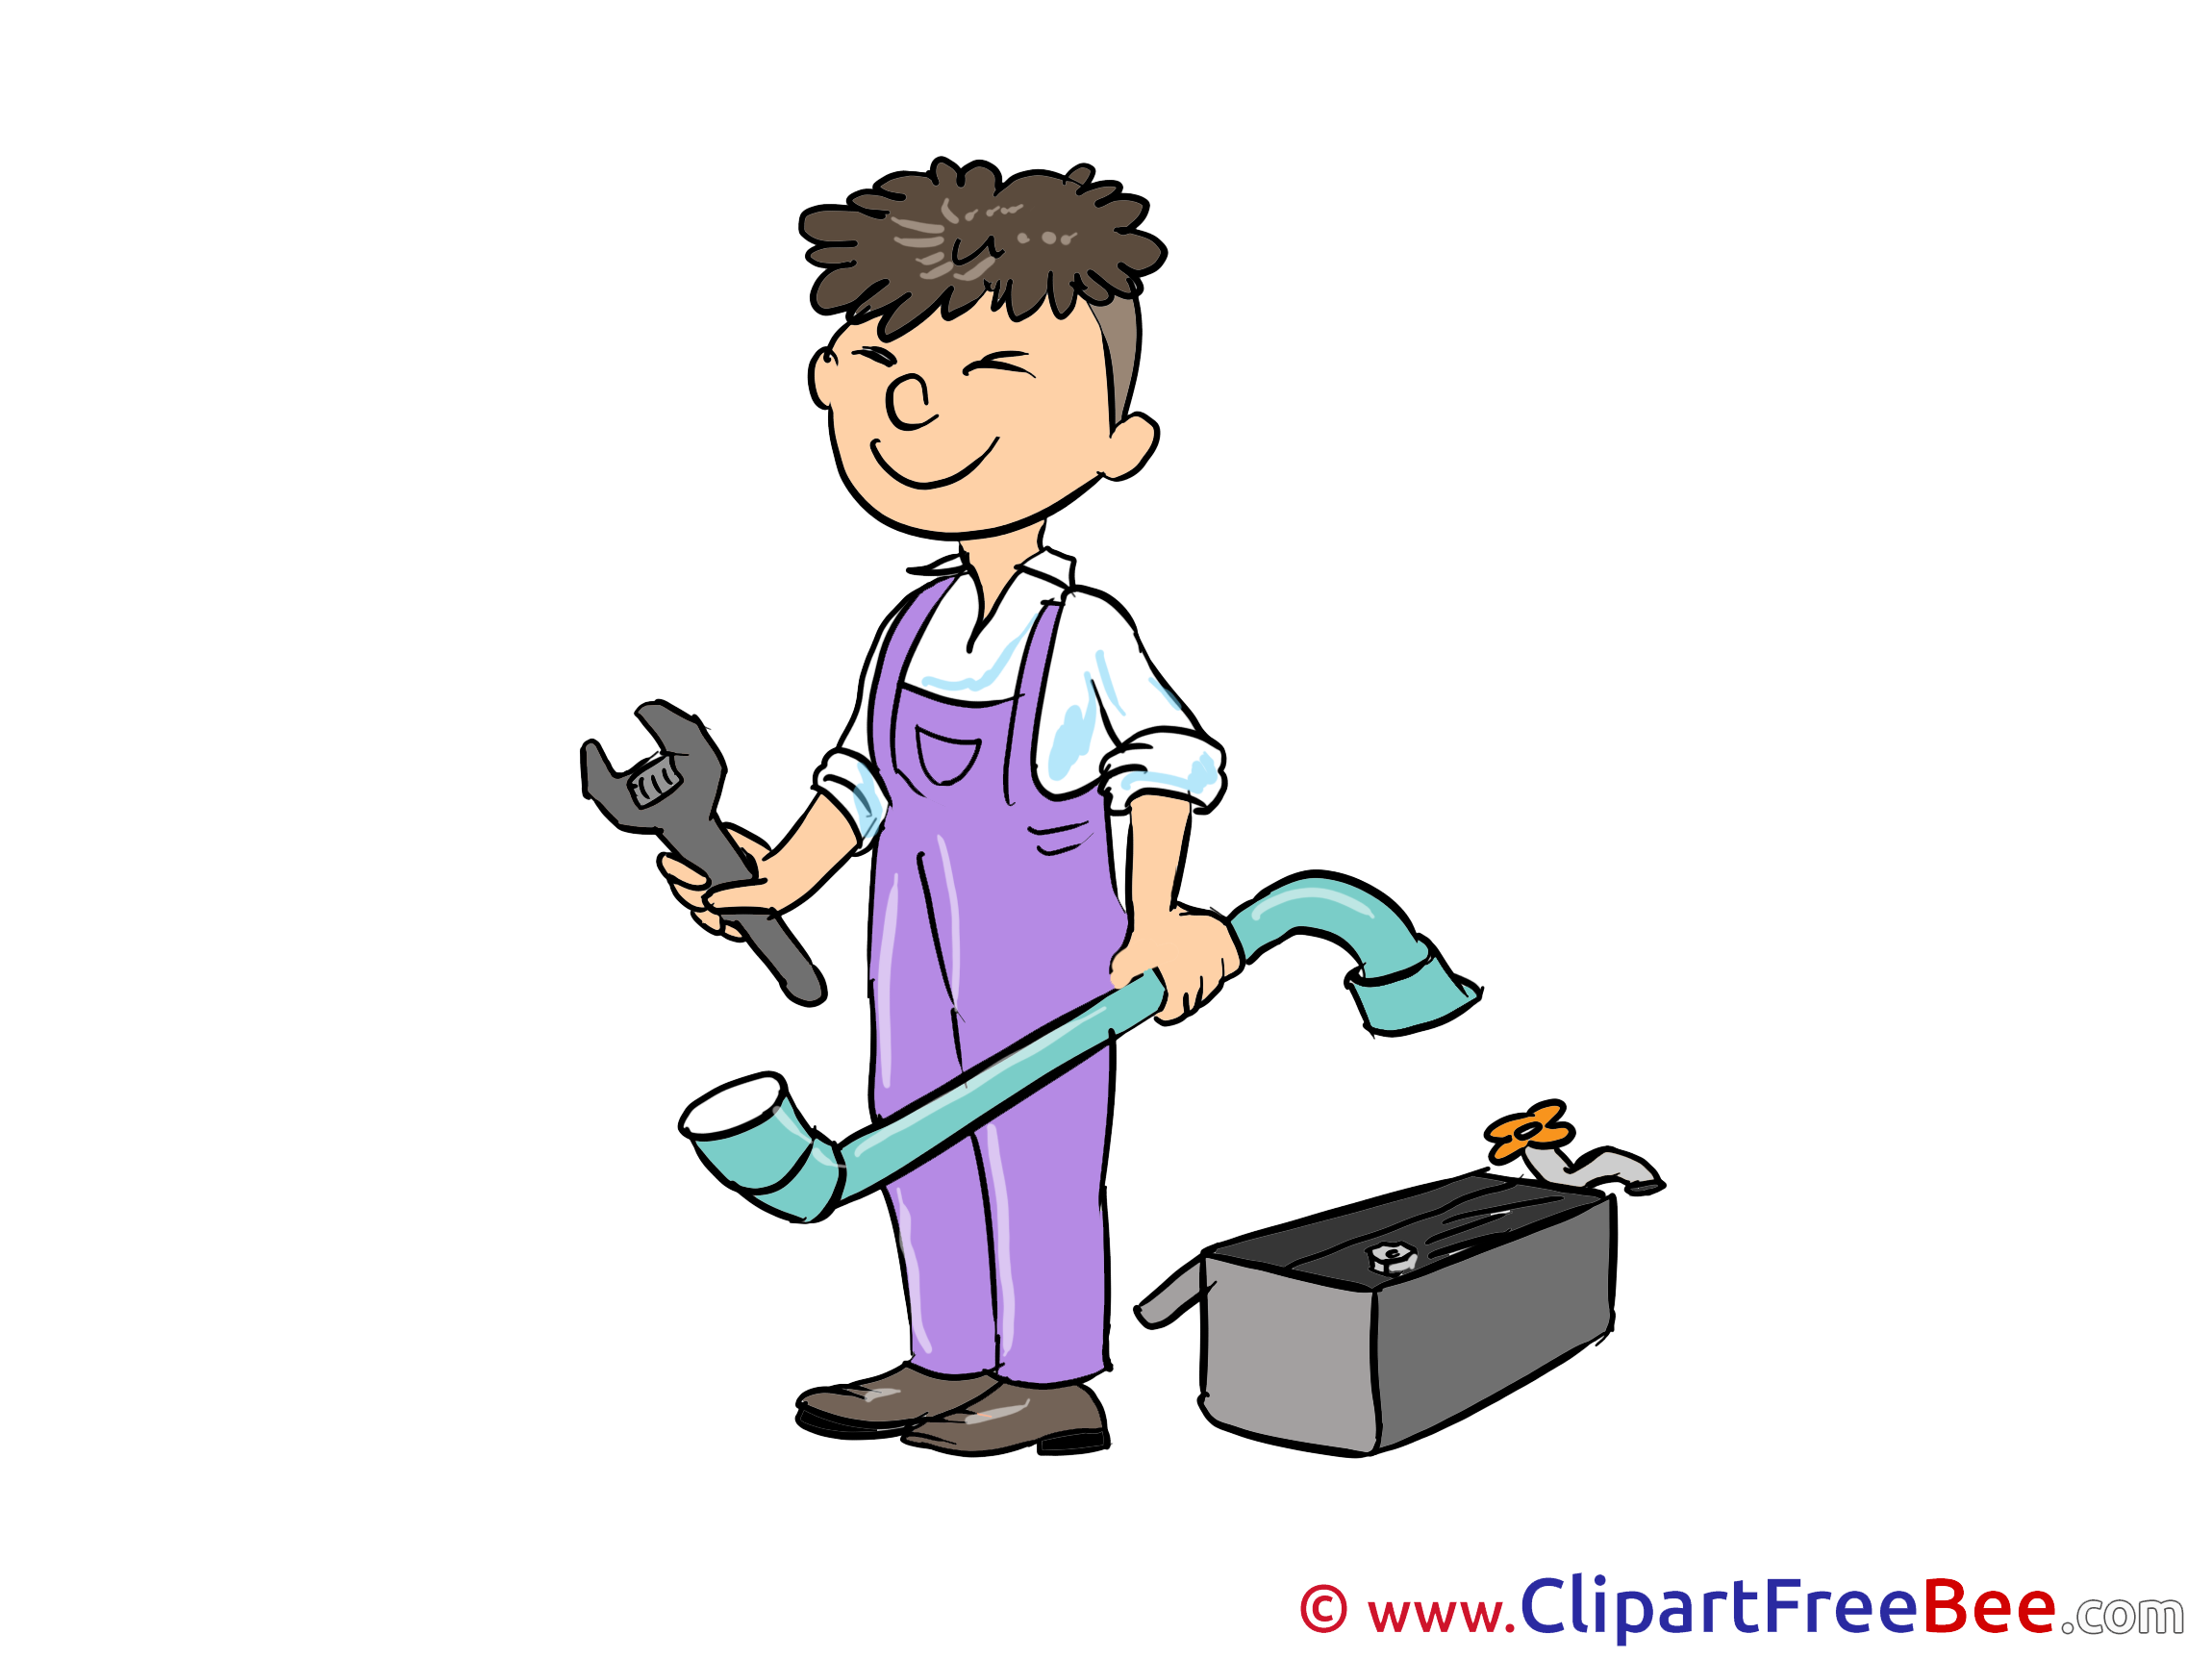 Plumber Clipart free Image download.